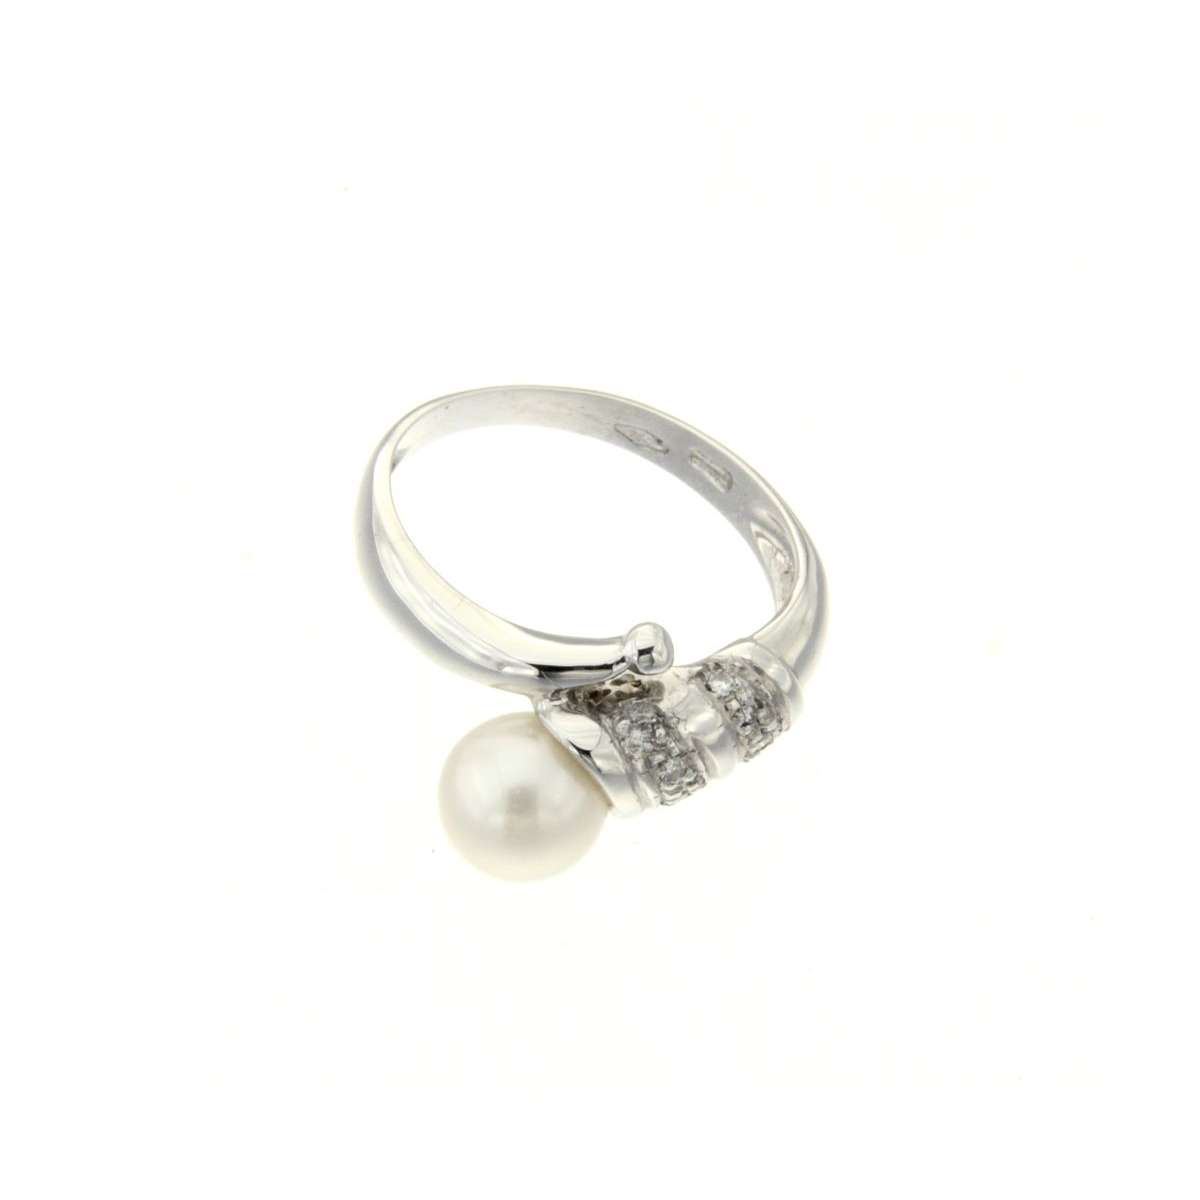 White gold pearl ring 7mm 0.04 carats diamonds G Color VS1 Clarity